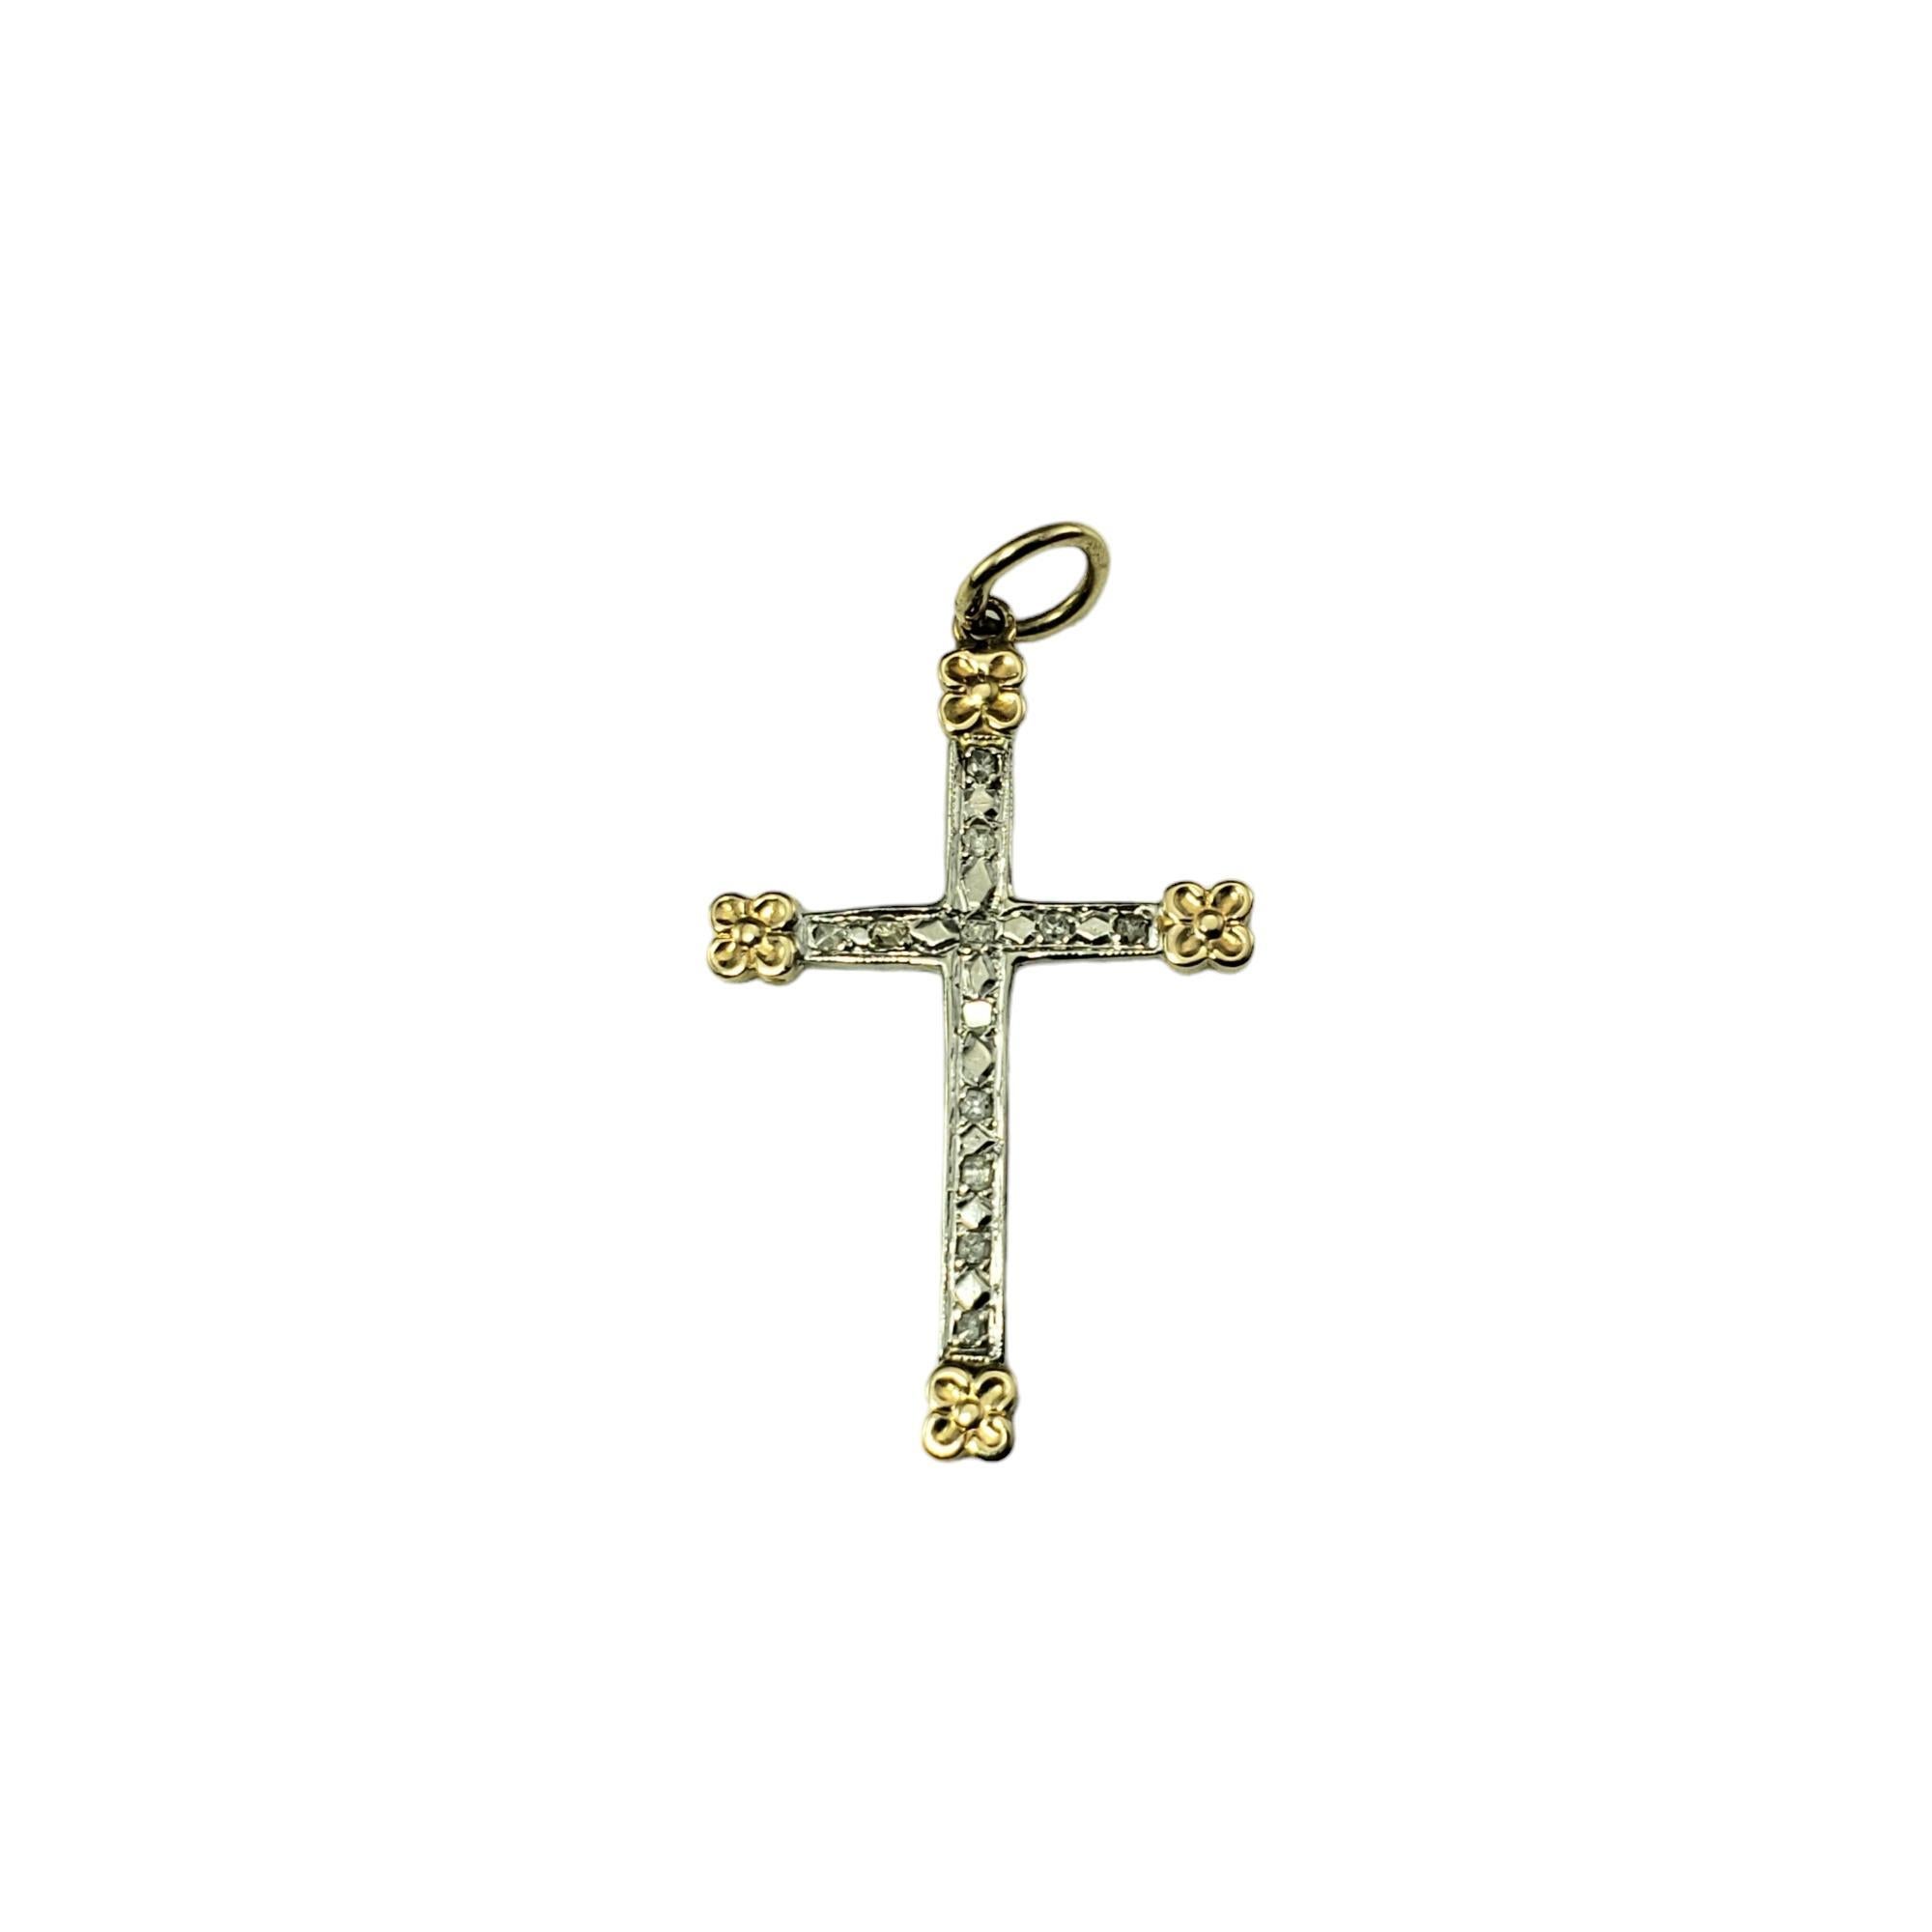 Vintage 14K White and Yellow Gold Diamond Cross Pendant-

This sparkling cross pendant features 12 round table cut diamonds set in classic 14K white and yellow gold.

Total diamond weight: .05 ct.

Diamond color: H

Diamond clarity: I1

Size:  30 mm